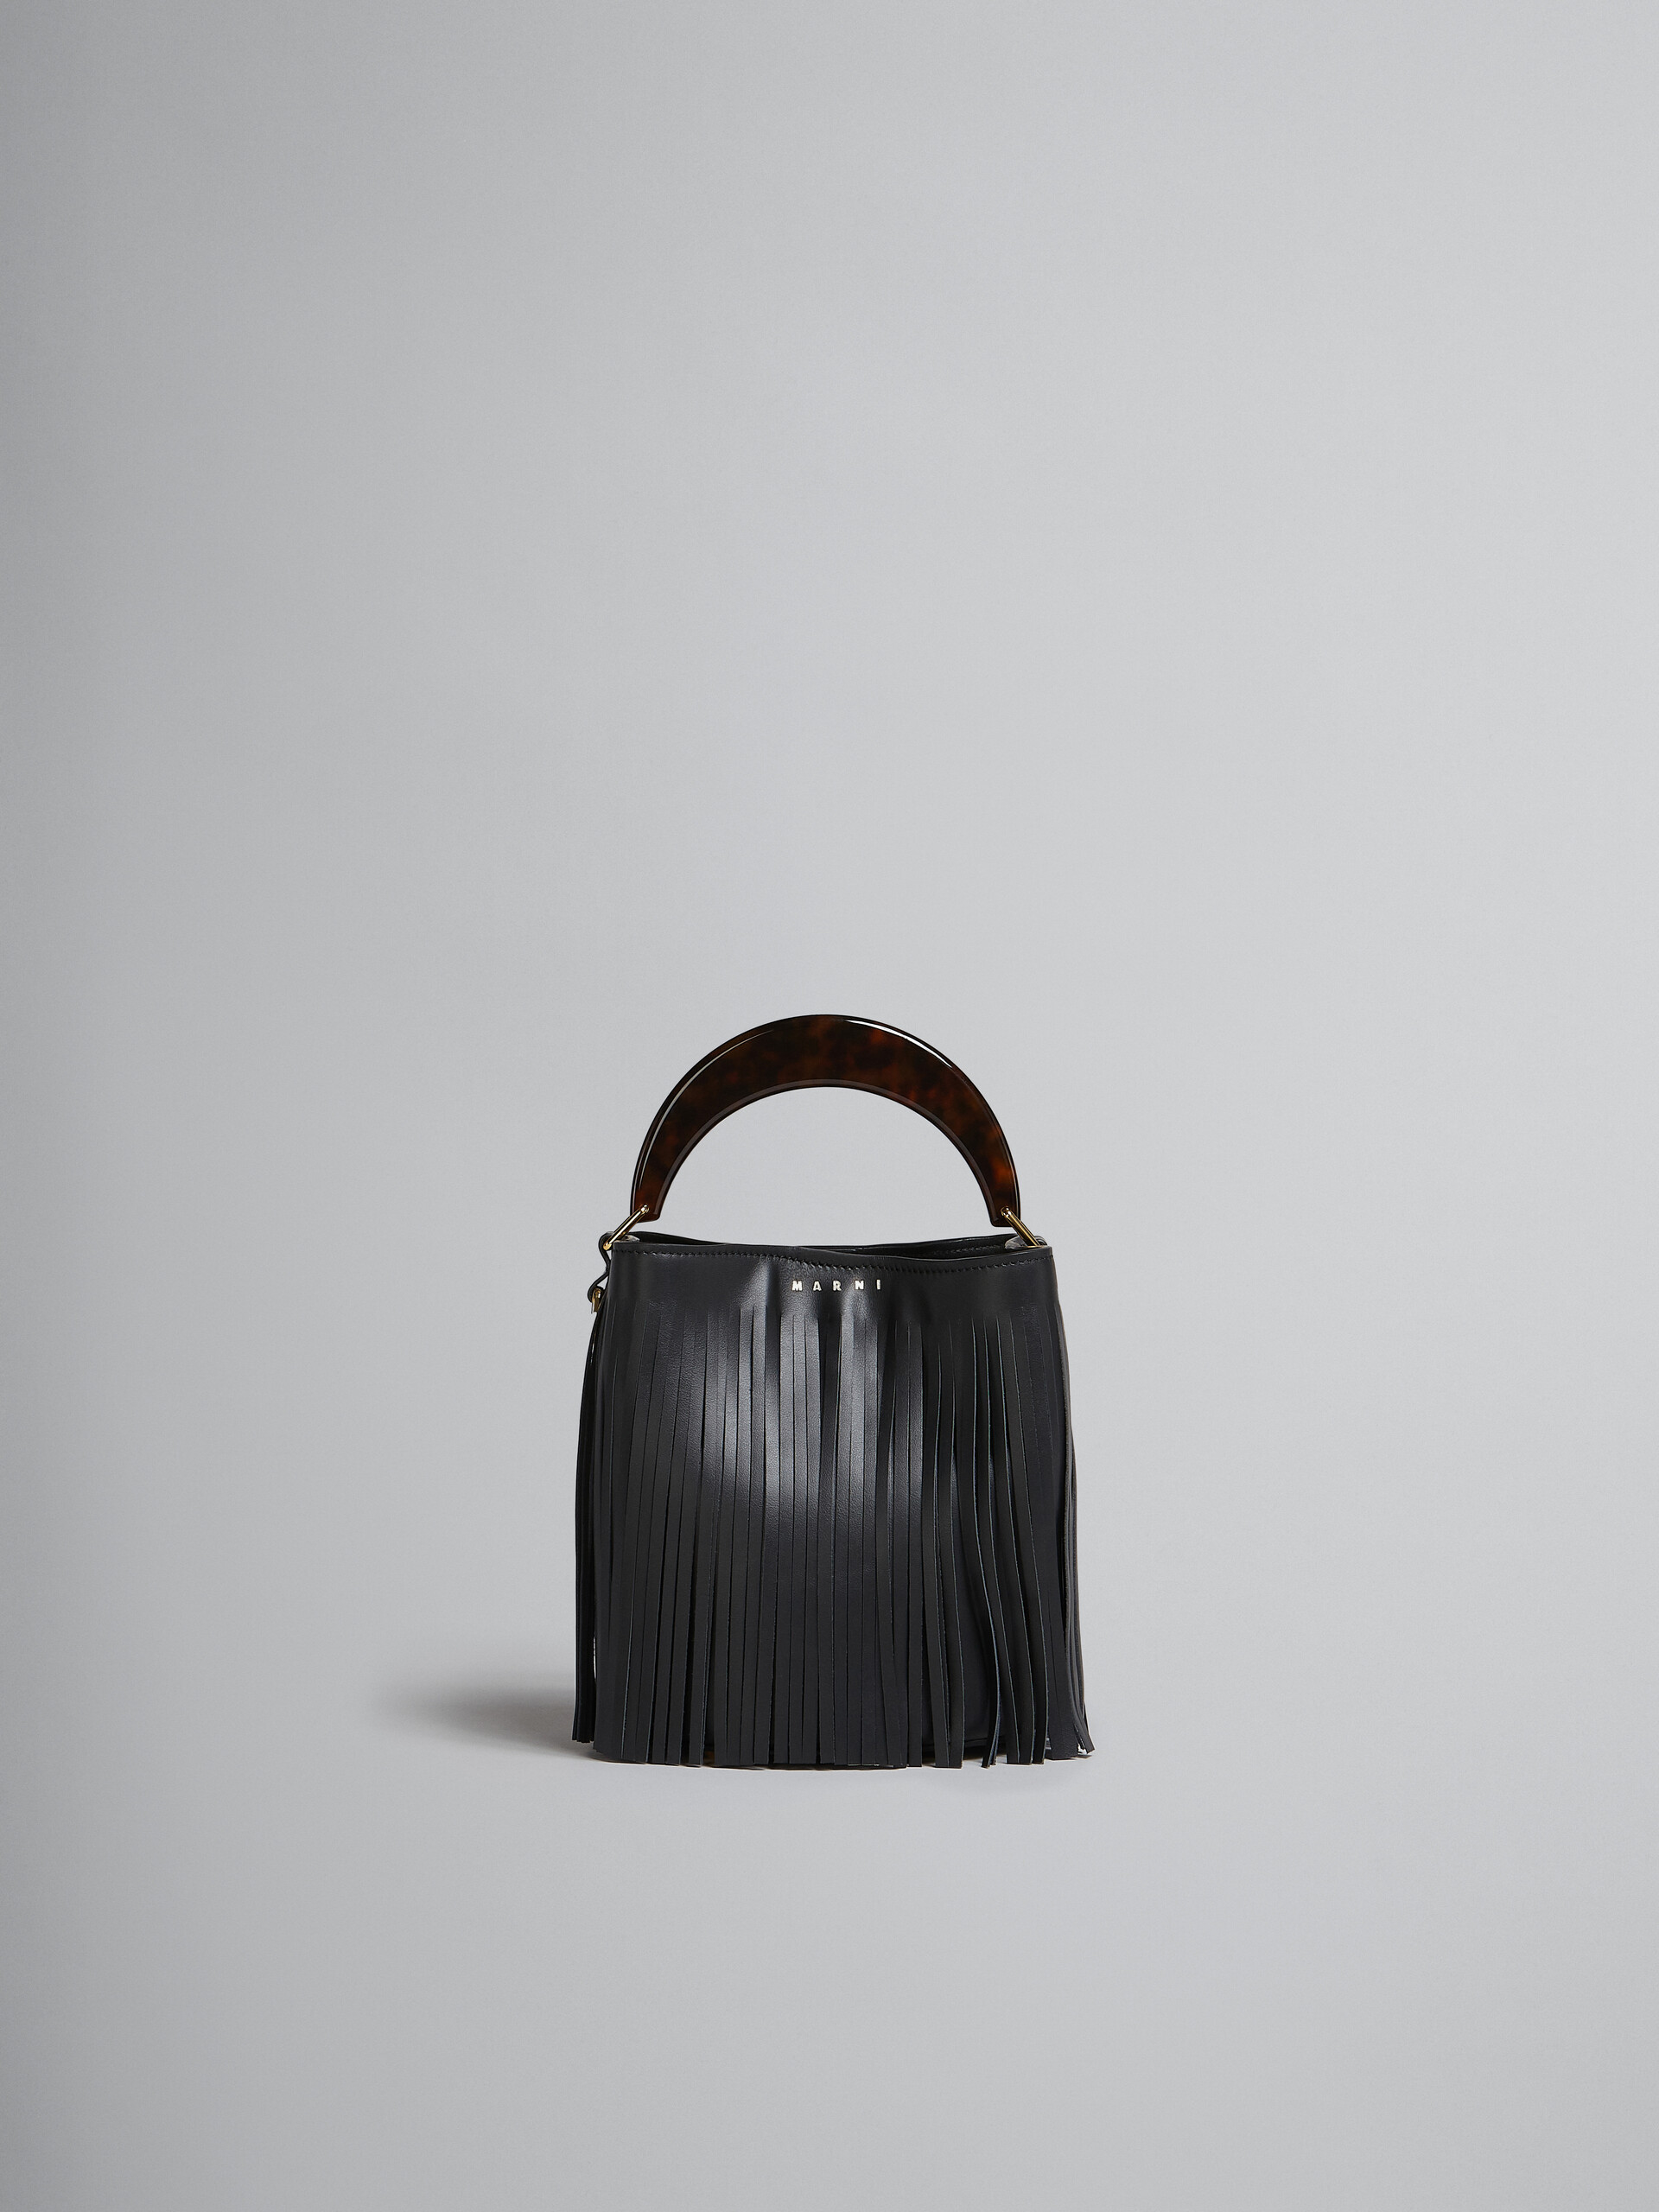 Venice Small Bucket in black leather with fringes - Shoulder Bag - Image 1